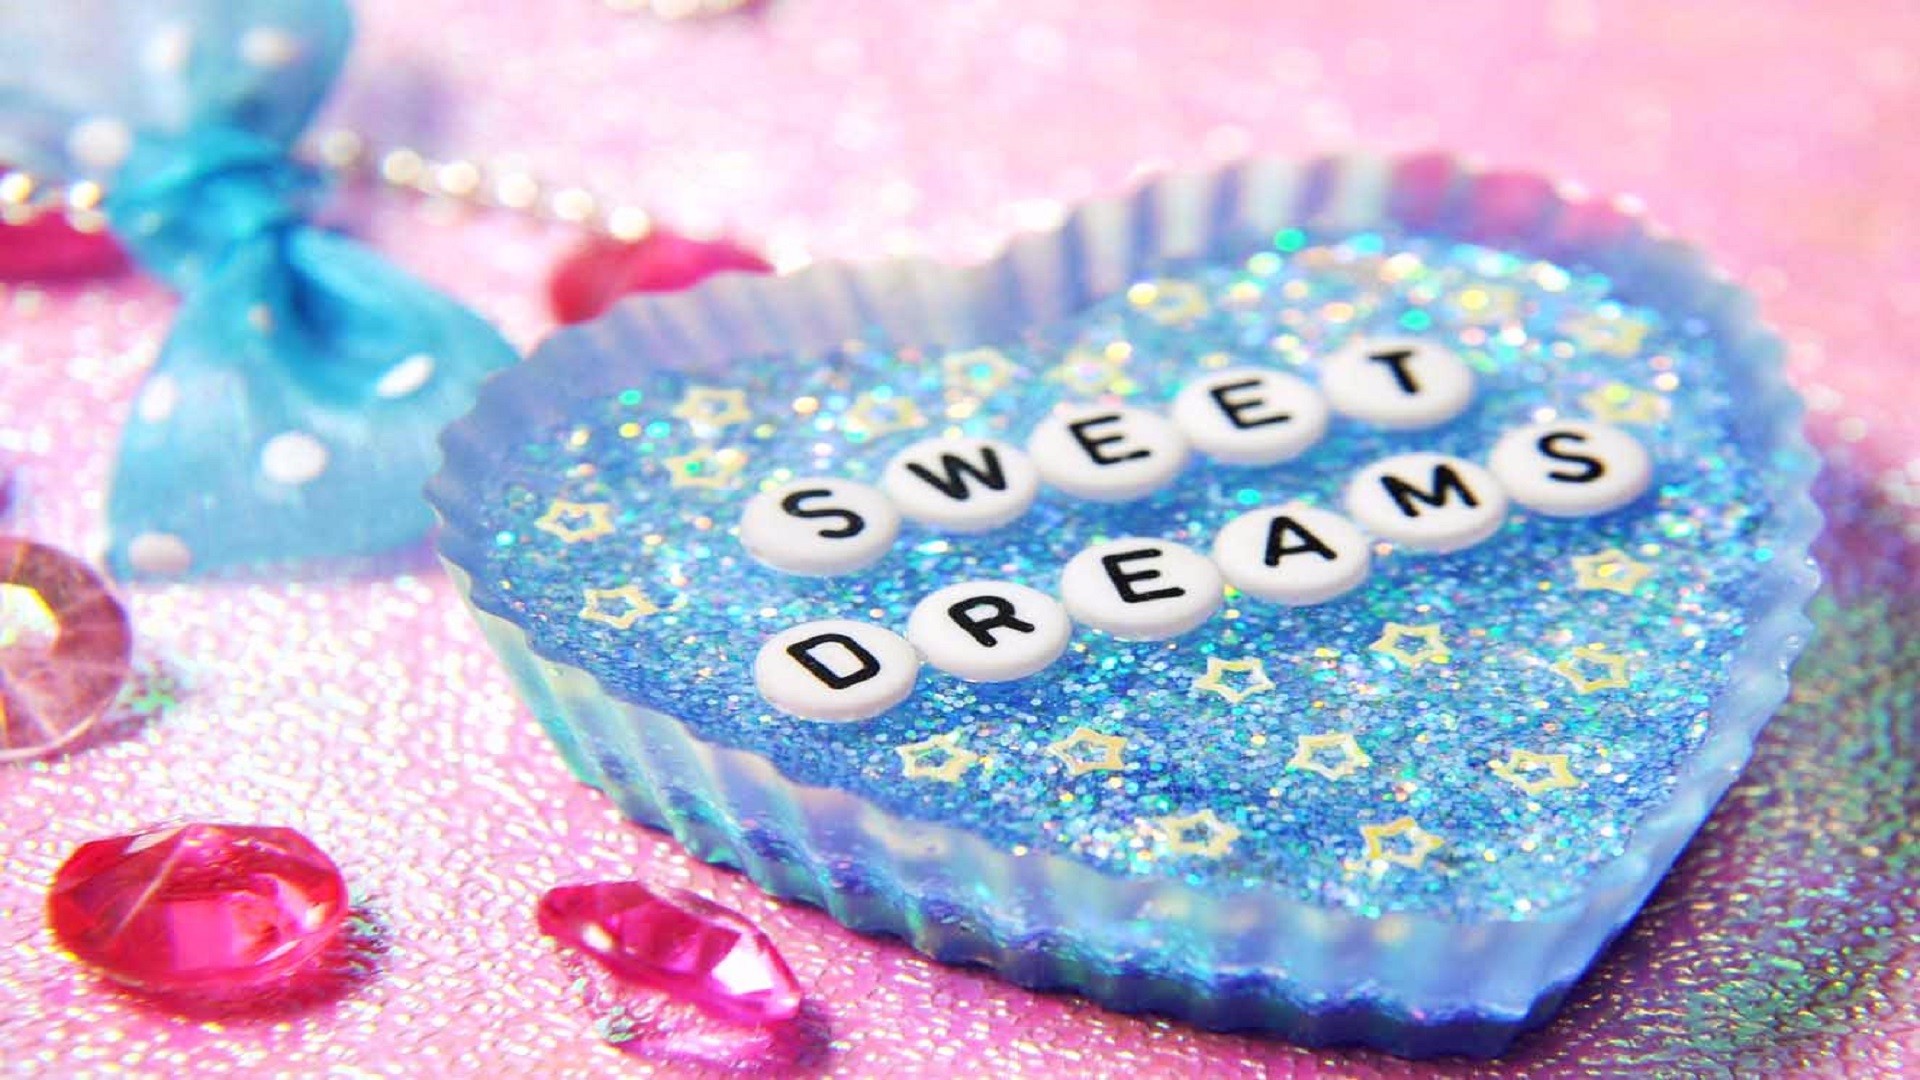 1920x1080 0 1024x768 Sweet Love Wallpapers  Sweet Love Wallpapers Free  Download, Awesome Sweet Love Pictures.